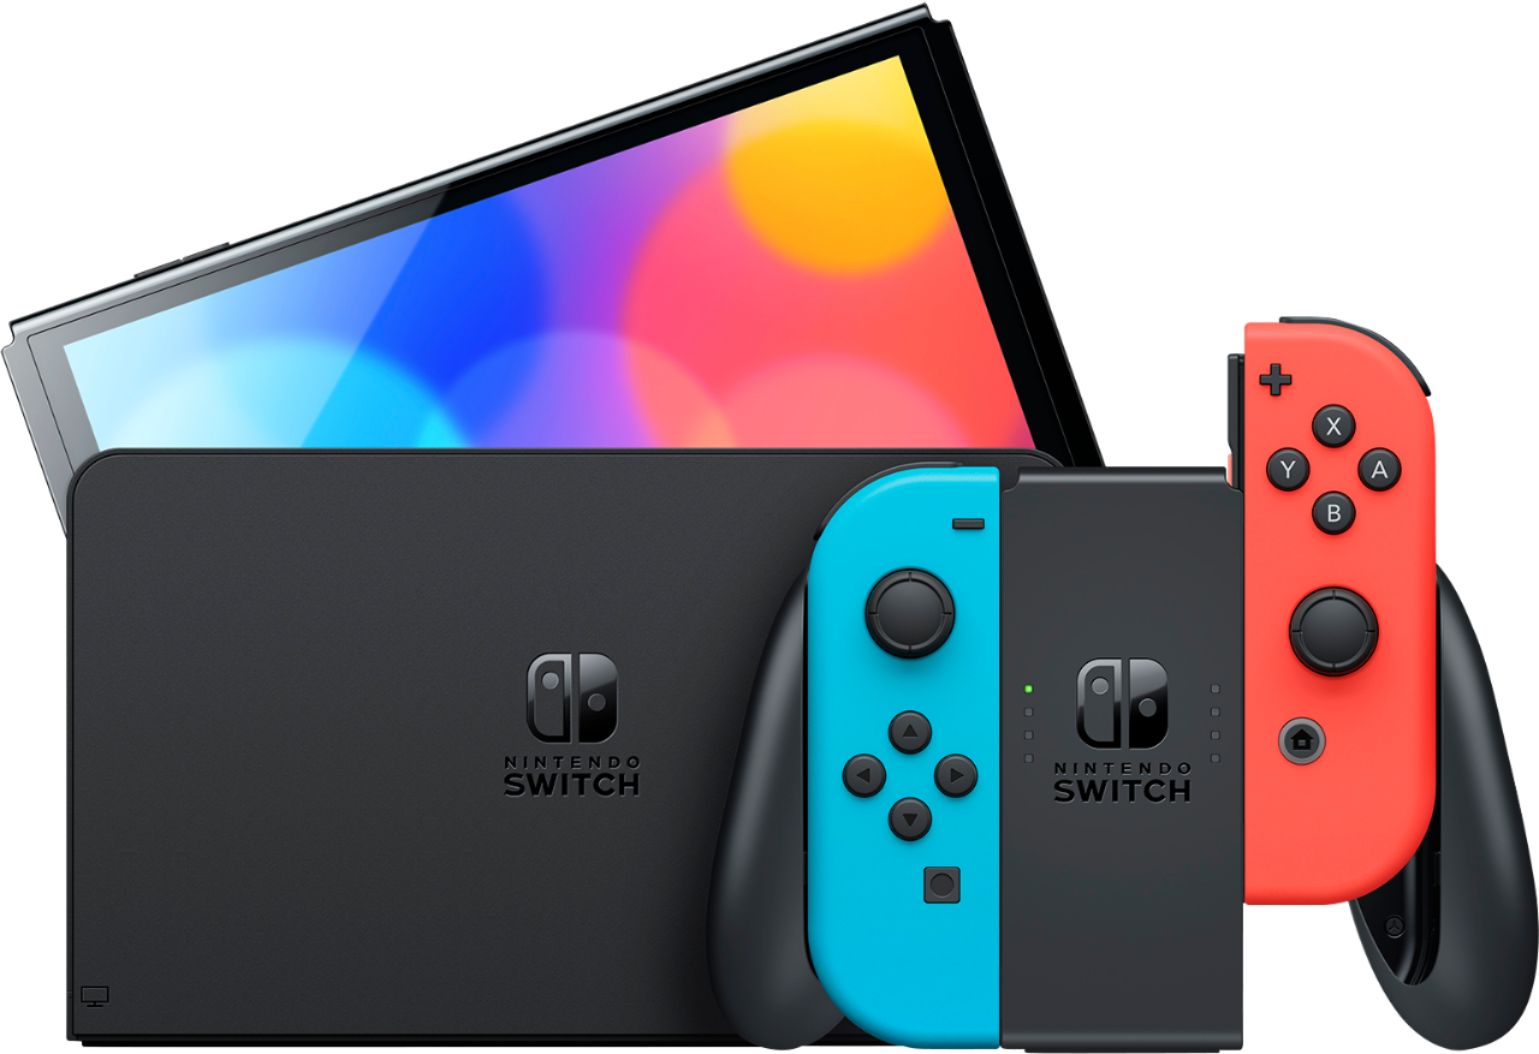 2022 New Nintendo Switch OLED Model Neon Red & Blue Joy Con 64GB Console HD Screen & LAN-Port Dock with Fire Emblem: Three Houses, Mytrix 128GB MicroSD Card and Accessories